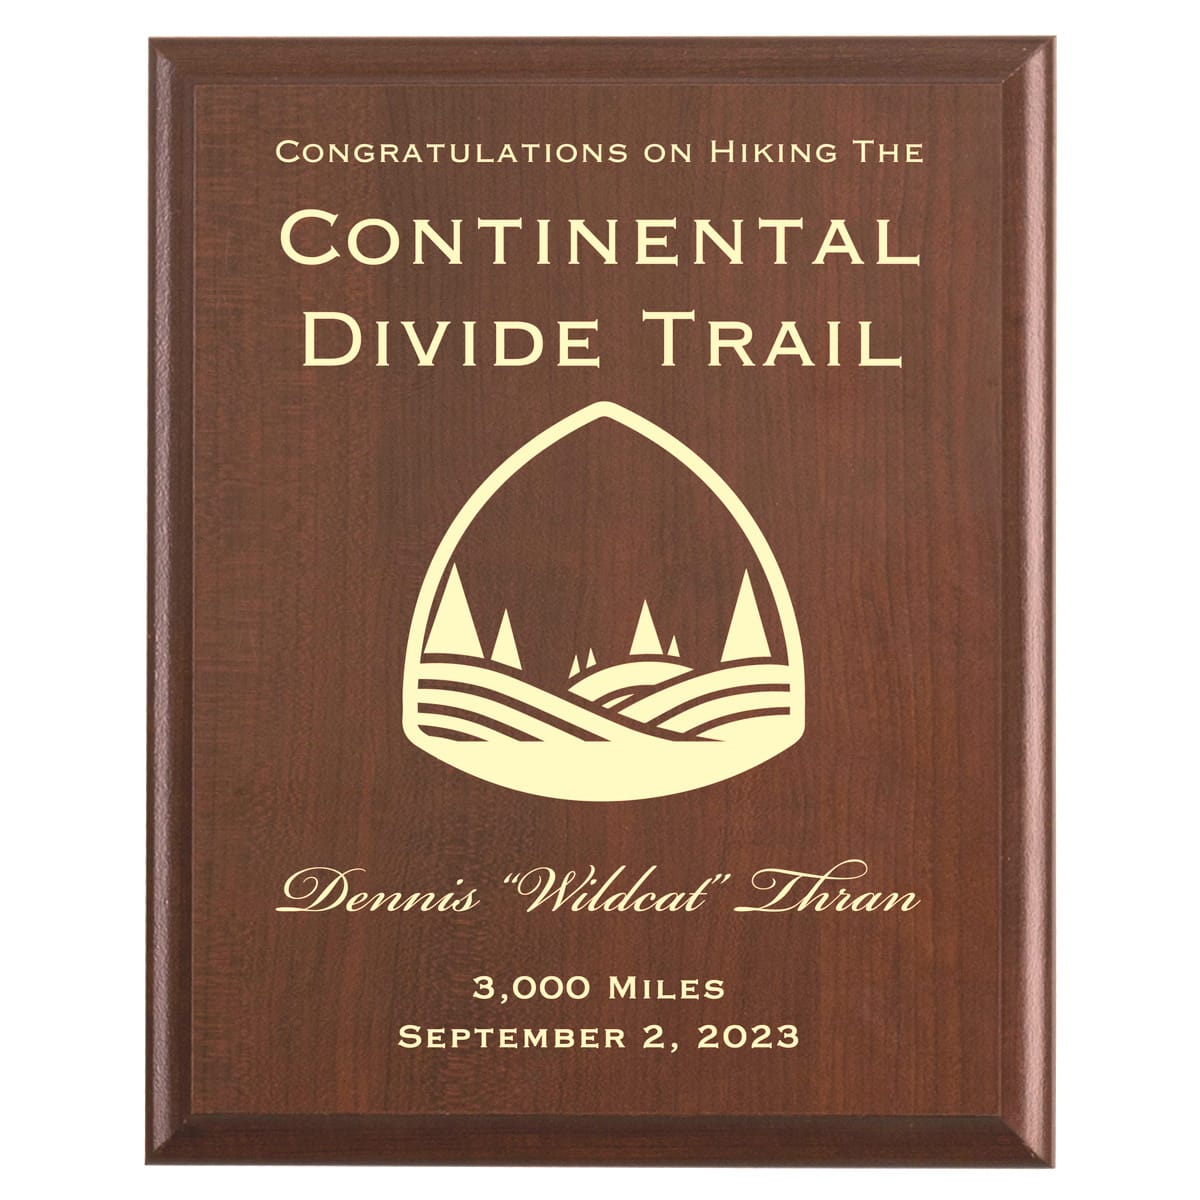 Plaque photo: Continental Divide Trail Thru Hike Award design with free personalization. Wood style finish with customized text.